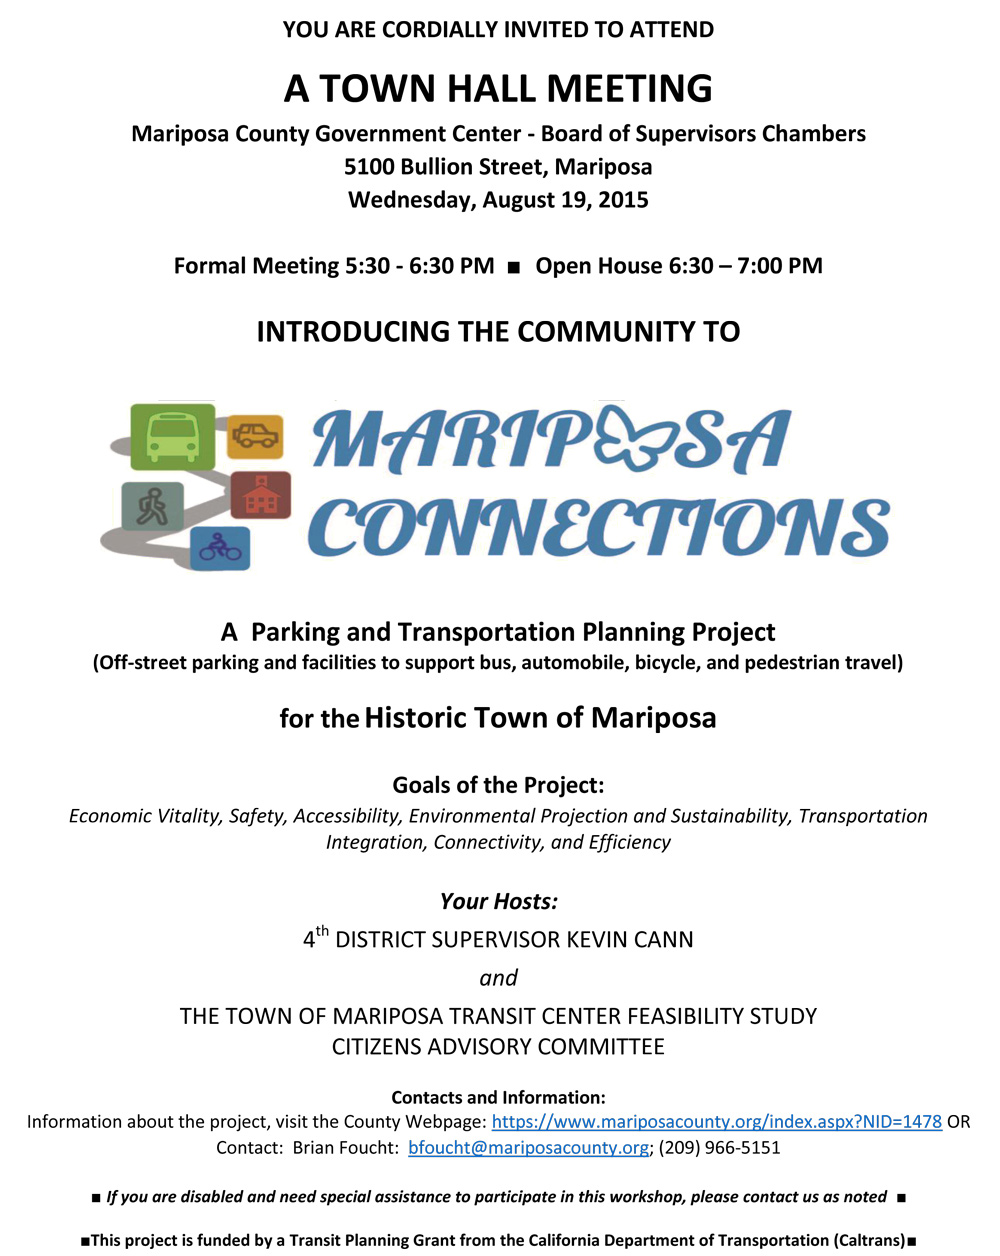 8 19 15 Town Hall Meeting Flyer